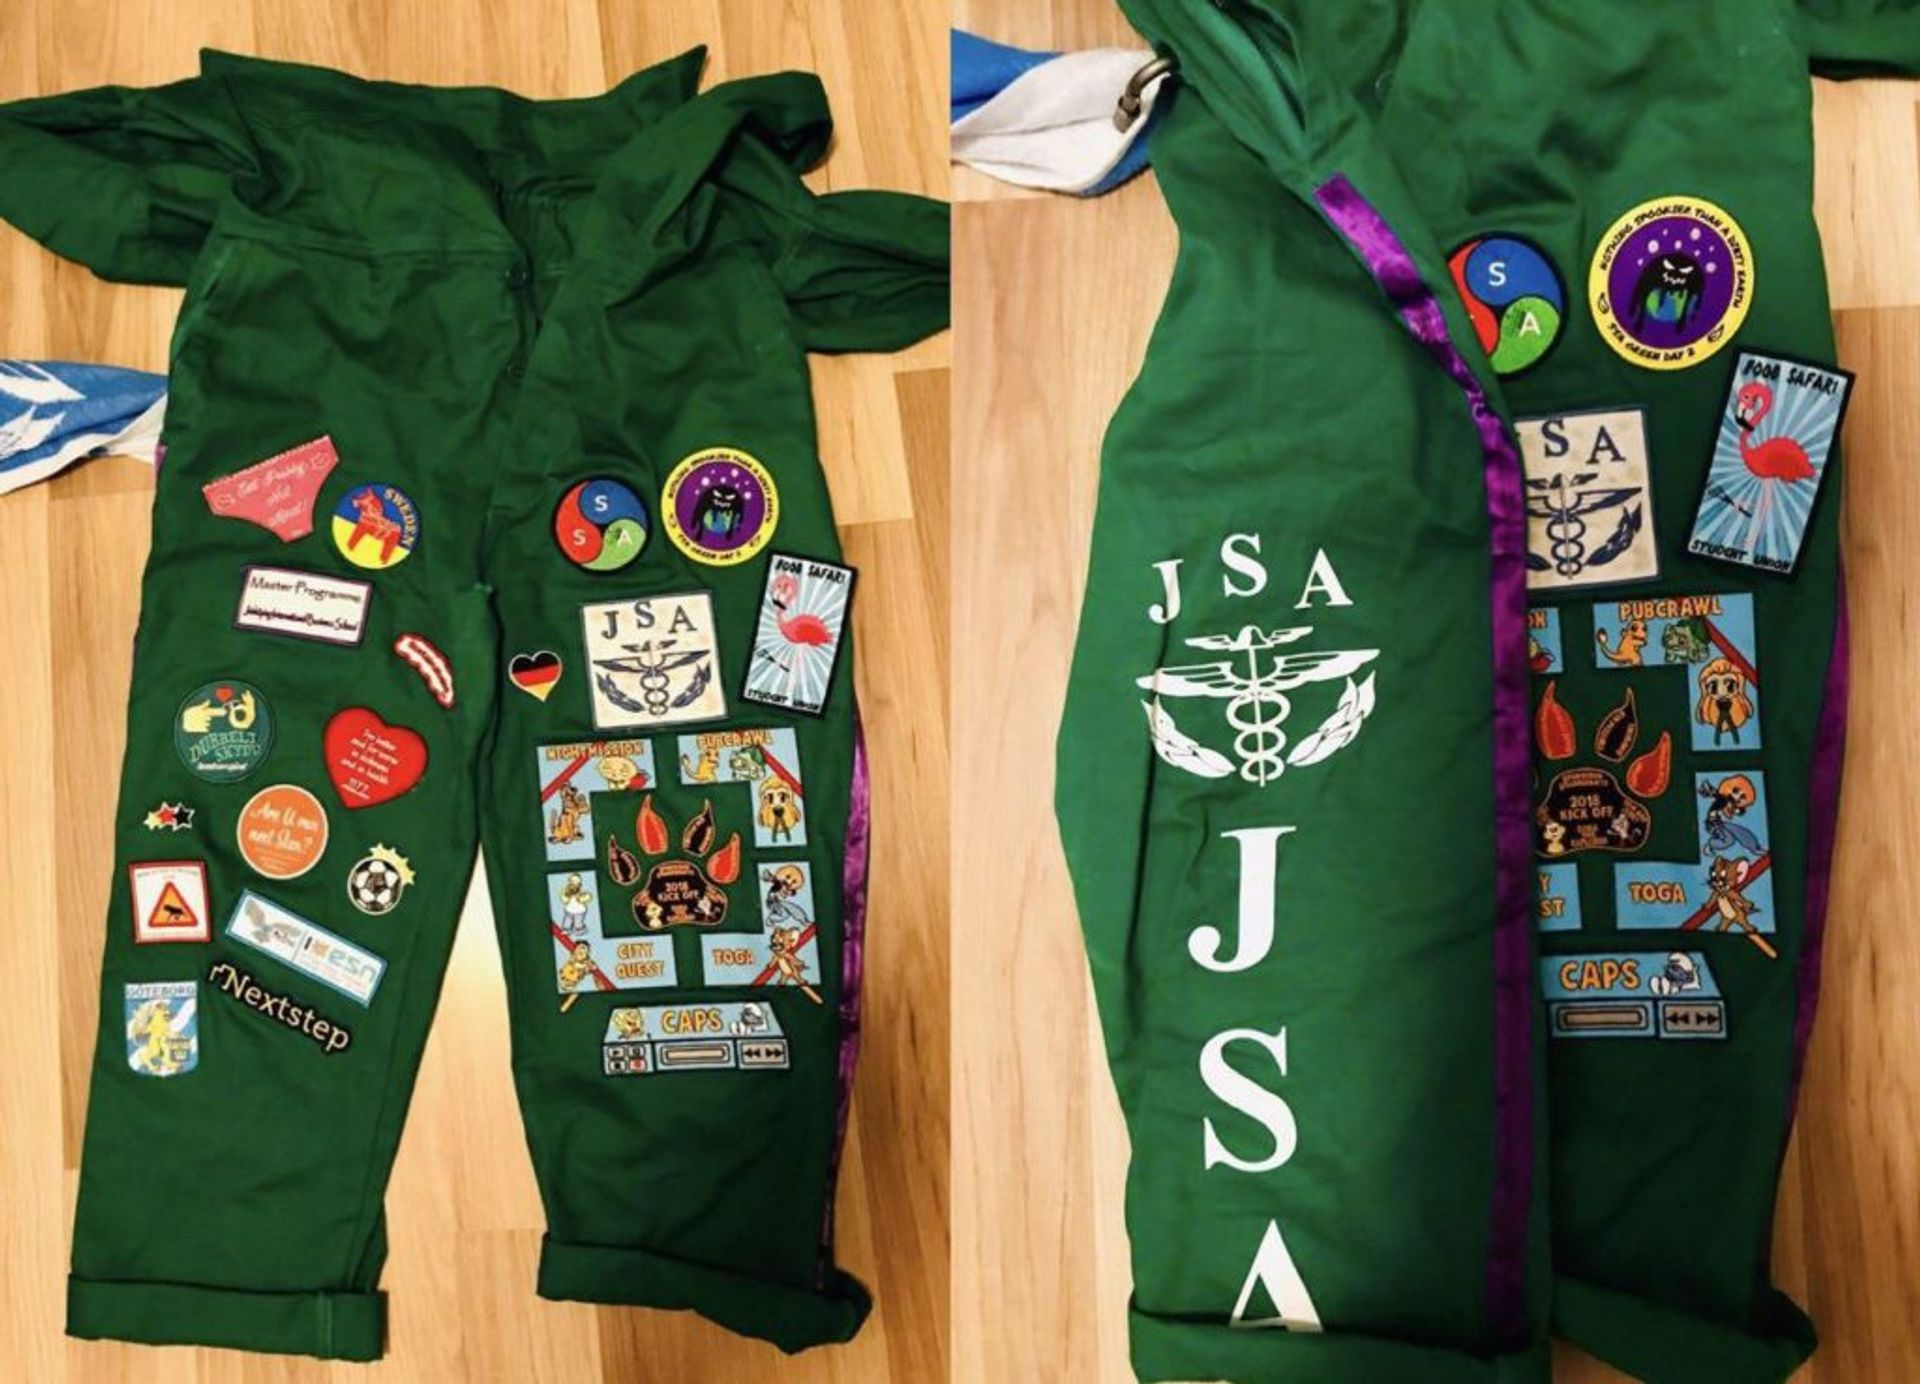 Green overall with several patches sewed on it.